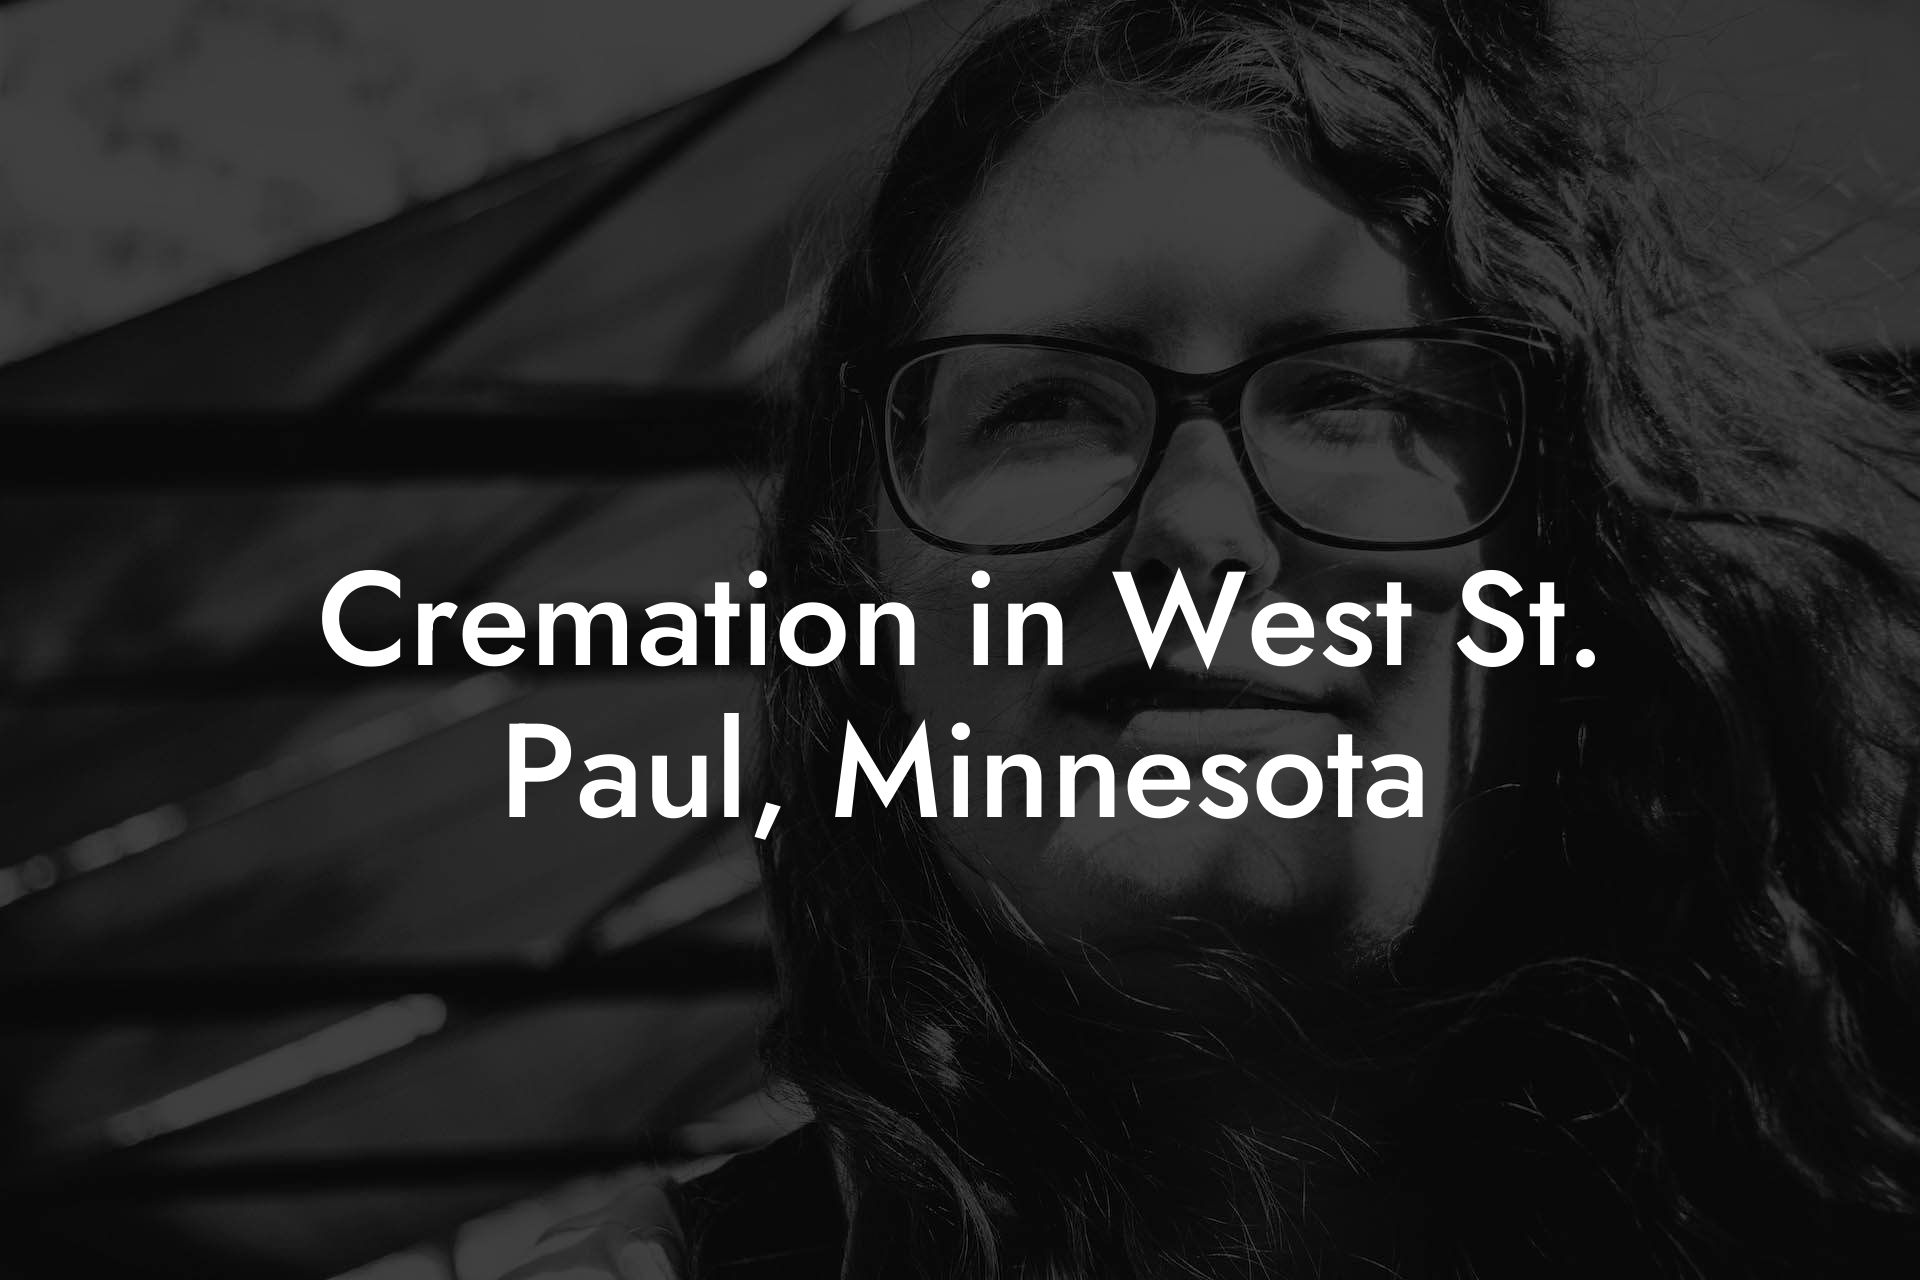 Cremation in West St. Paul, Minnesota